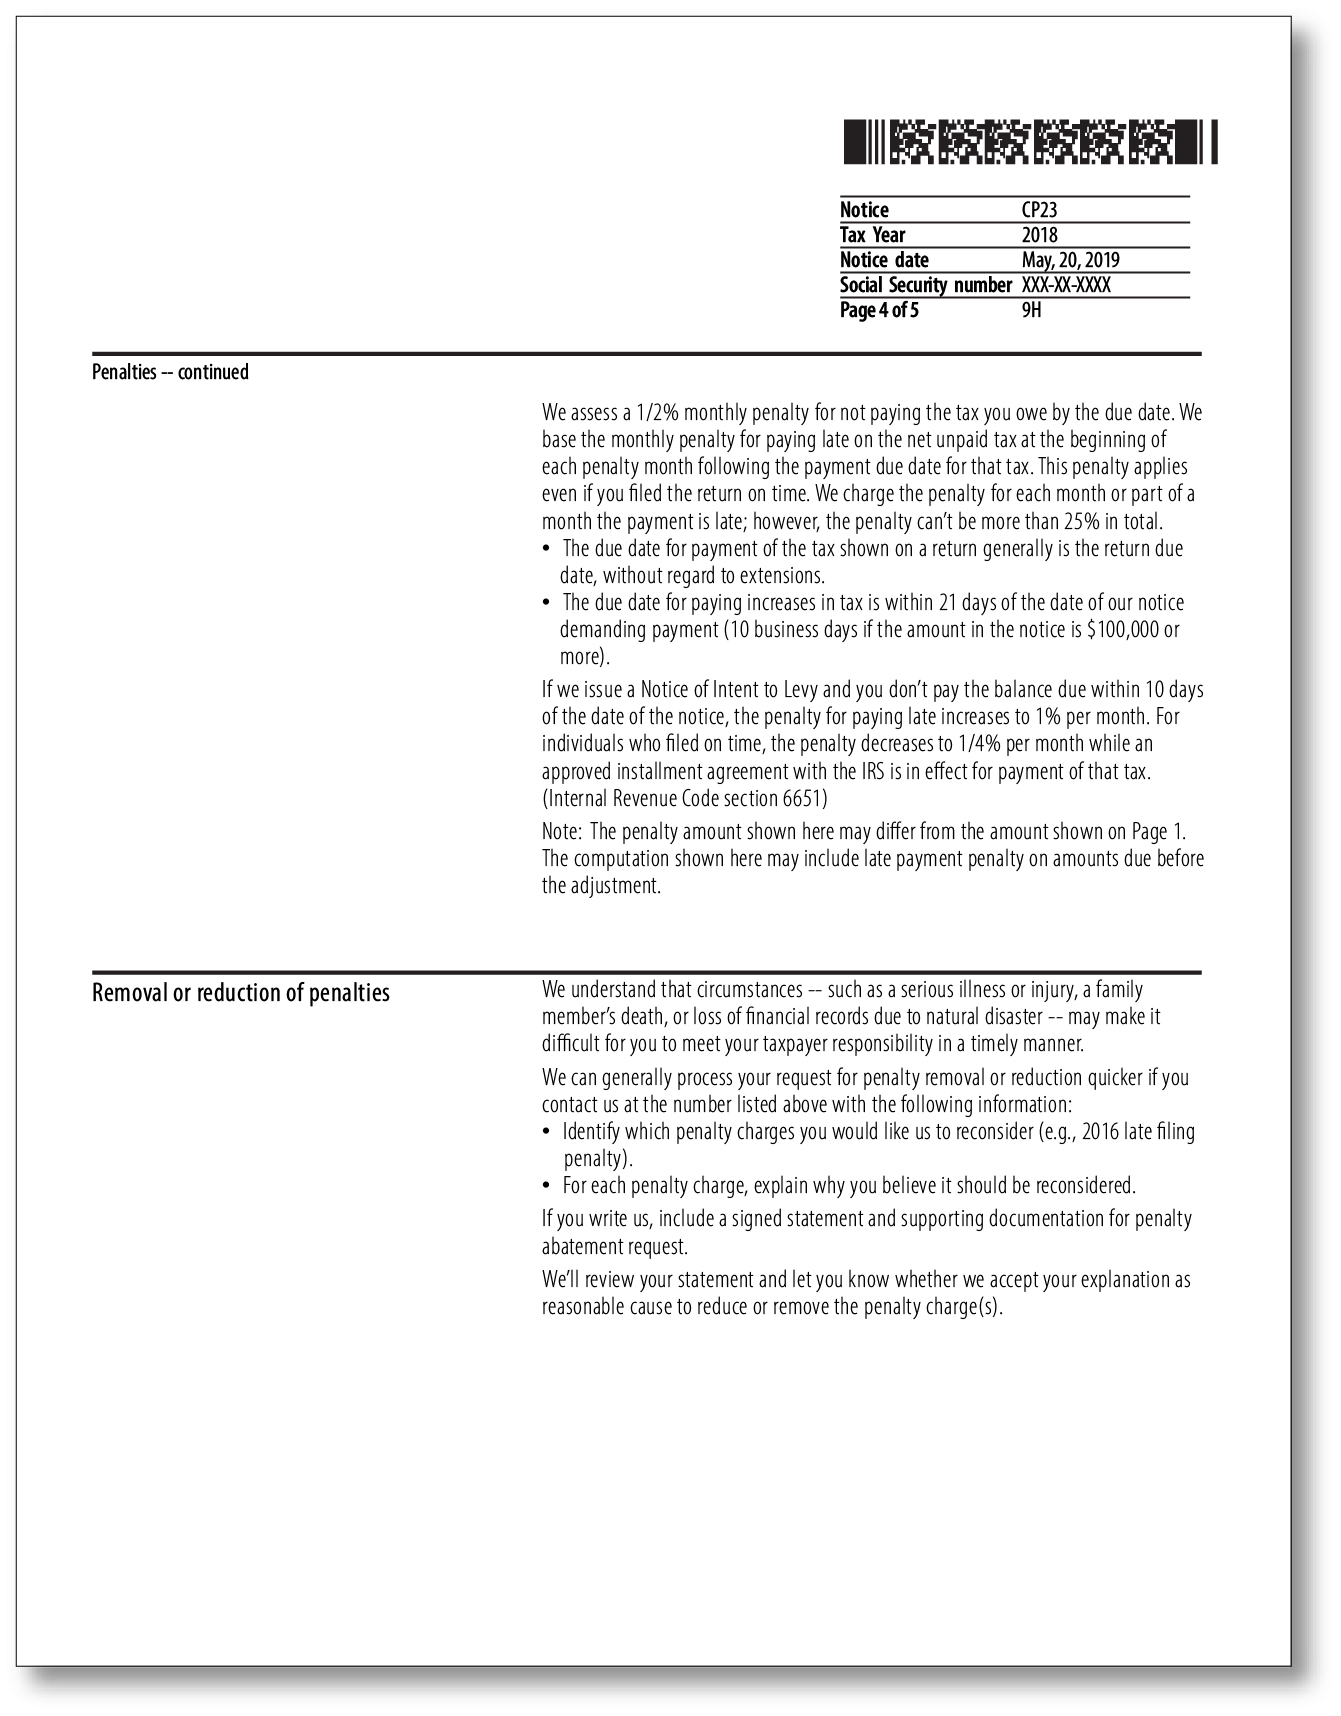 IRS Audit Letter CP23 – Sample 1